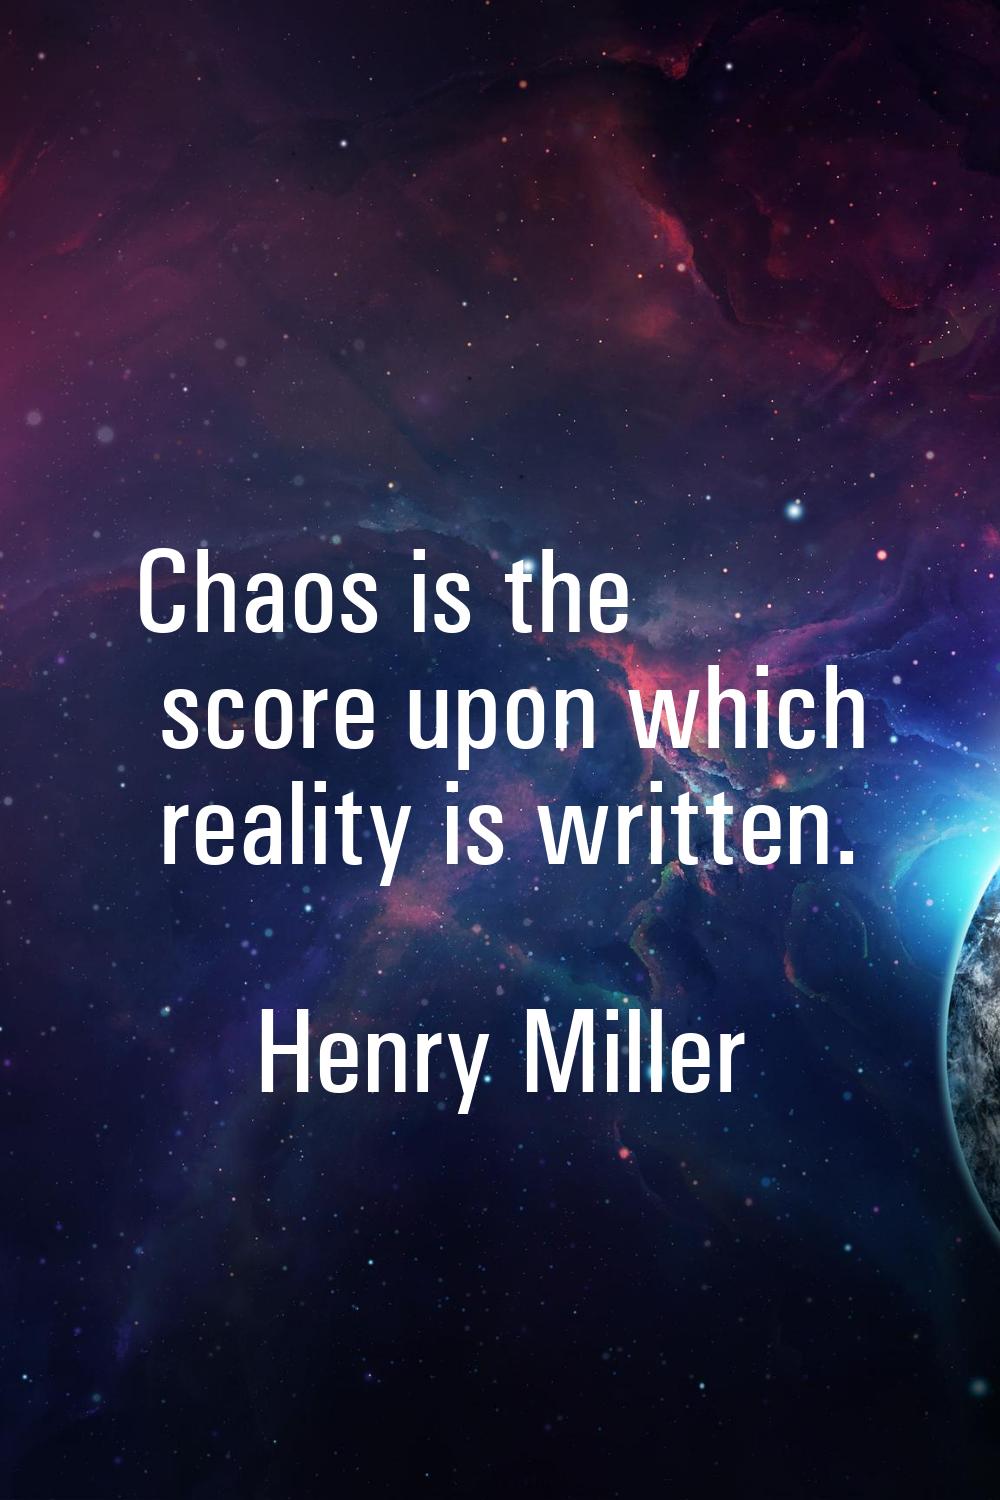 Chaos is the score upon which reality is written.